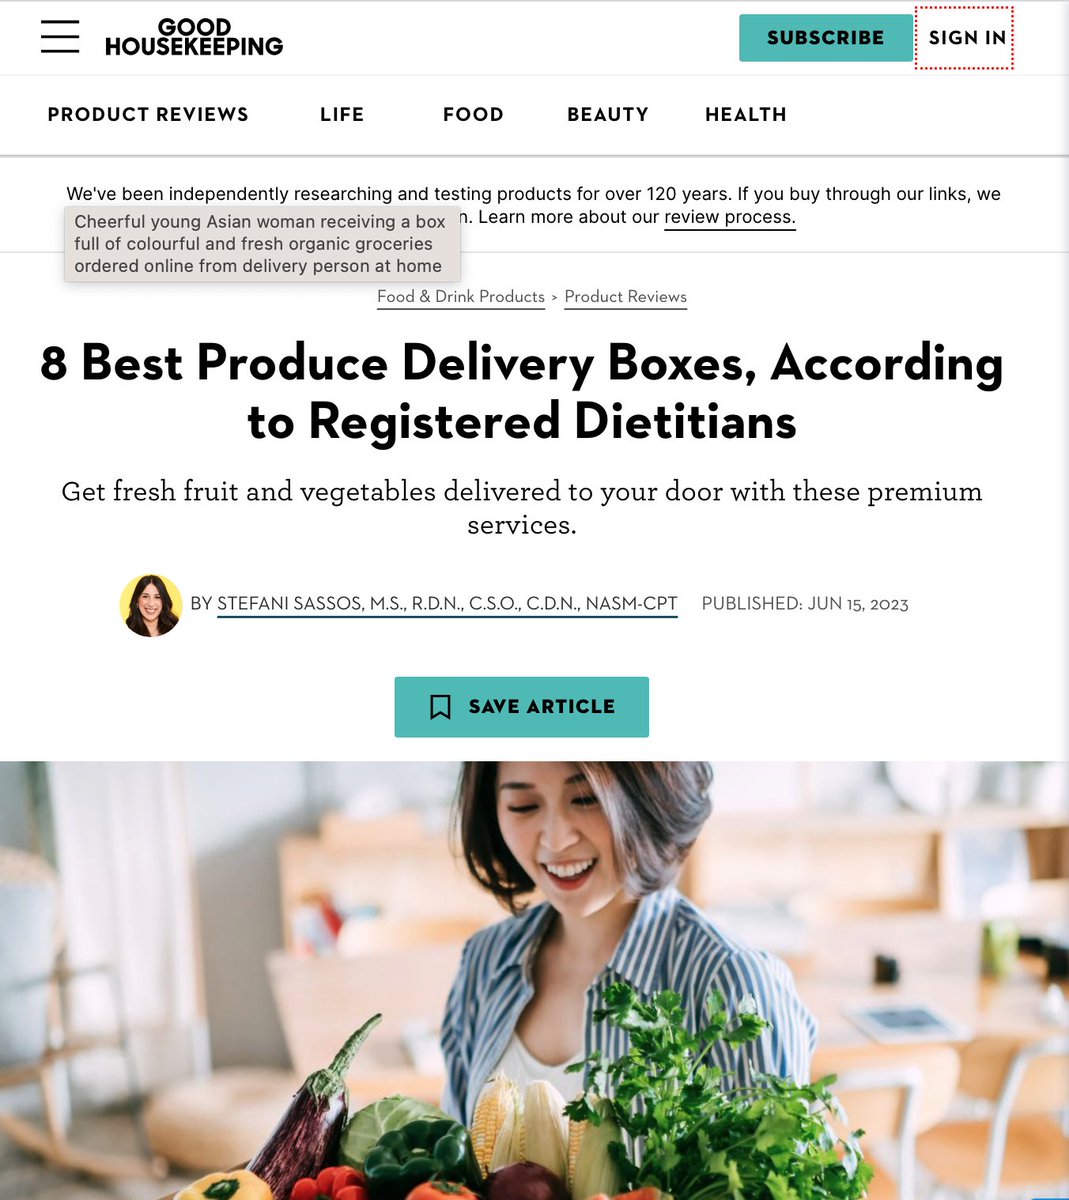 Woot! 🙌 Just got featured in @goodhousemag as The Best Fruit Delivery in the '8 Best Produce Delivery Boxes, According to Registered Dietitians!' #fruits #fruitdelivery goodhousekeeping.com/food-products/…